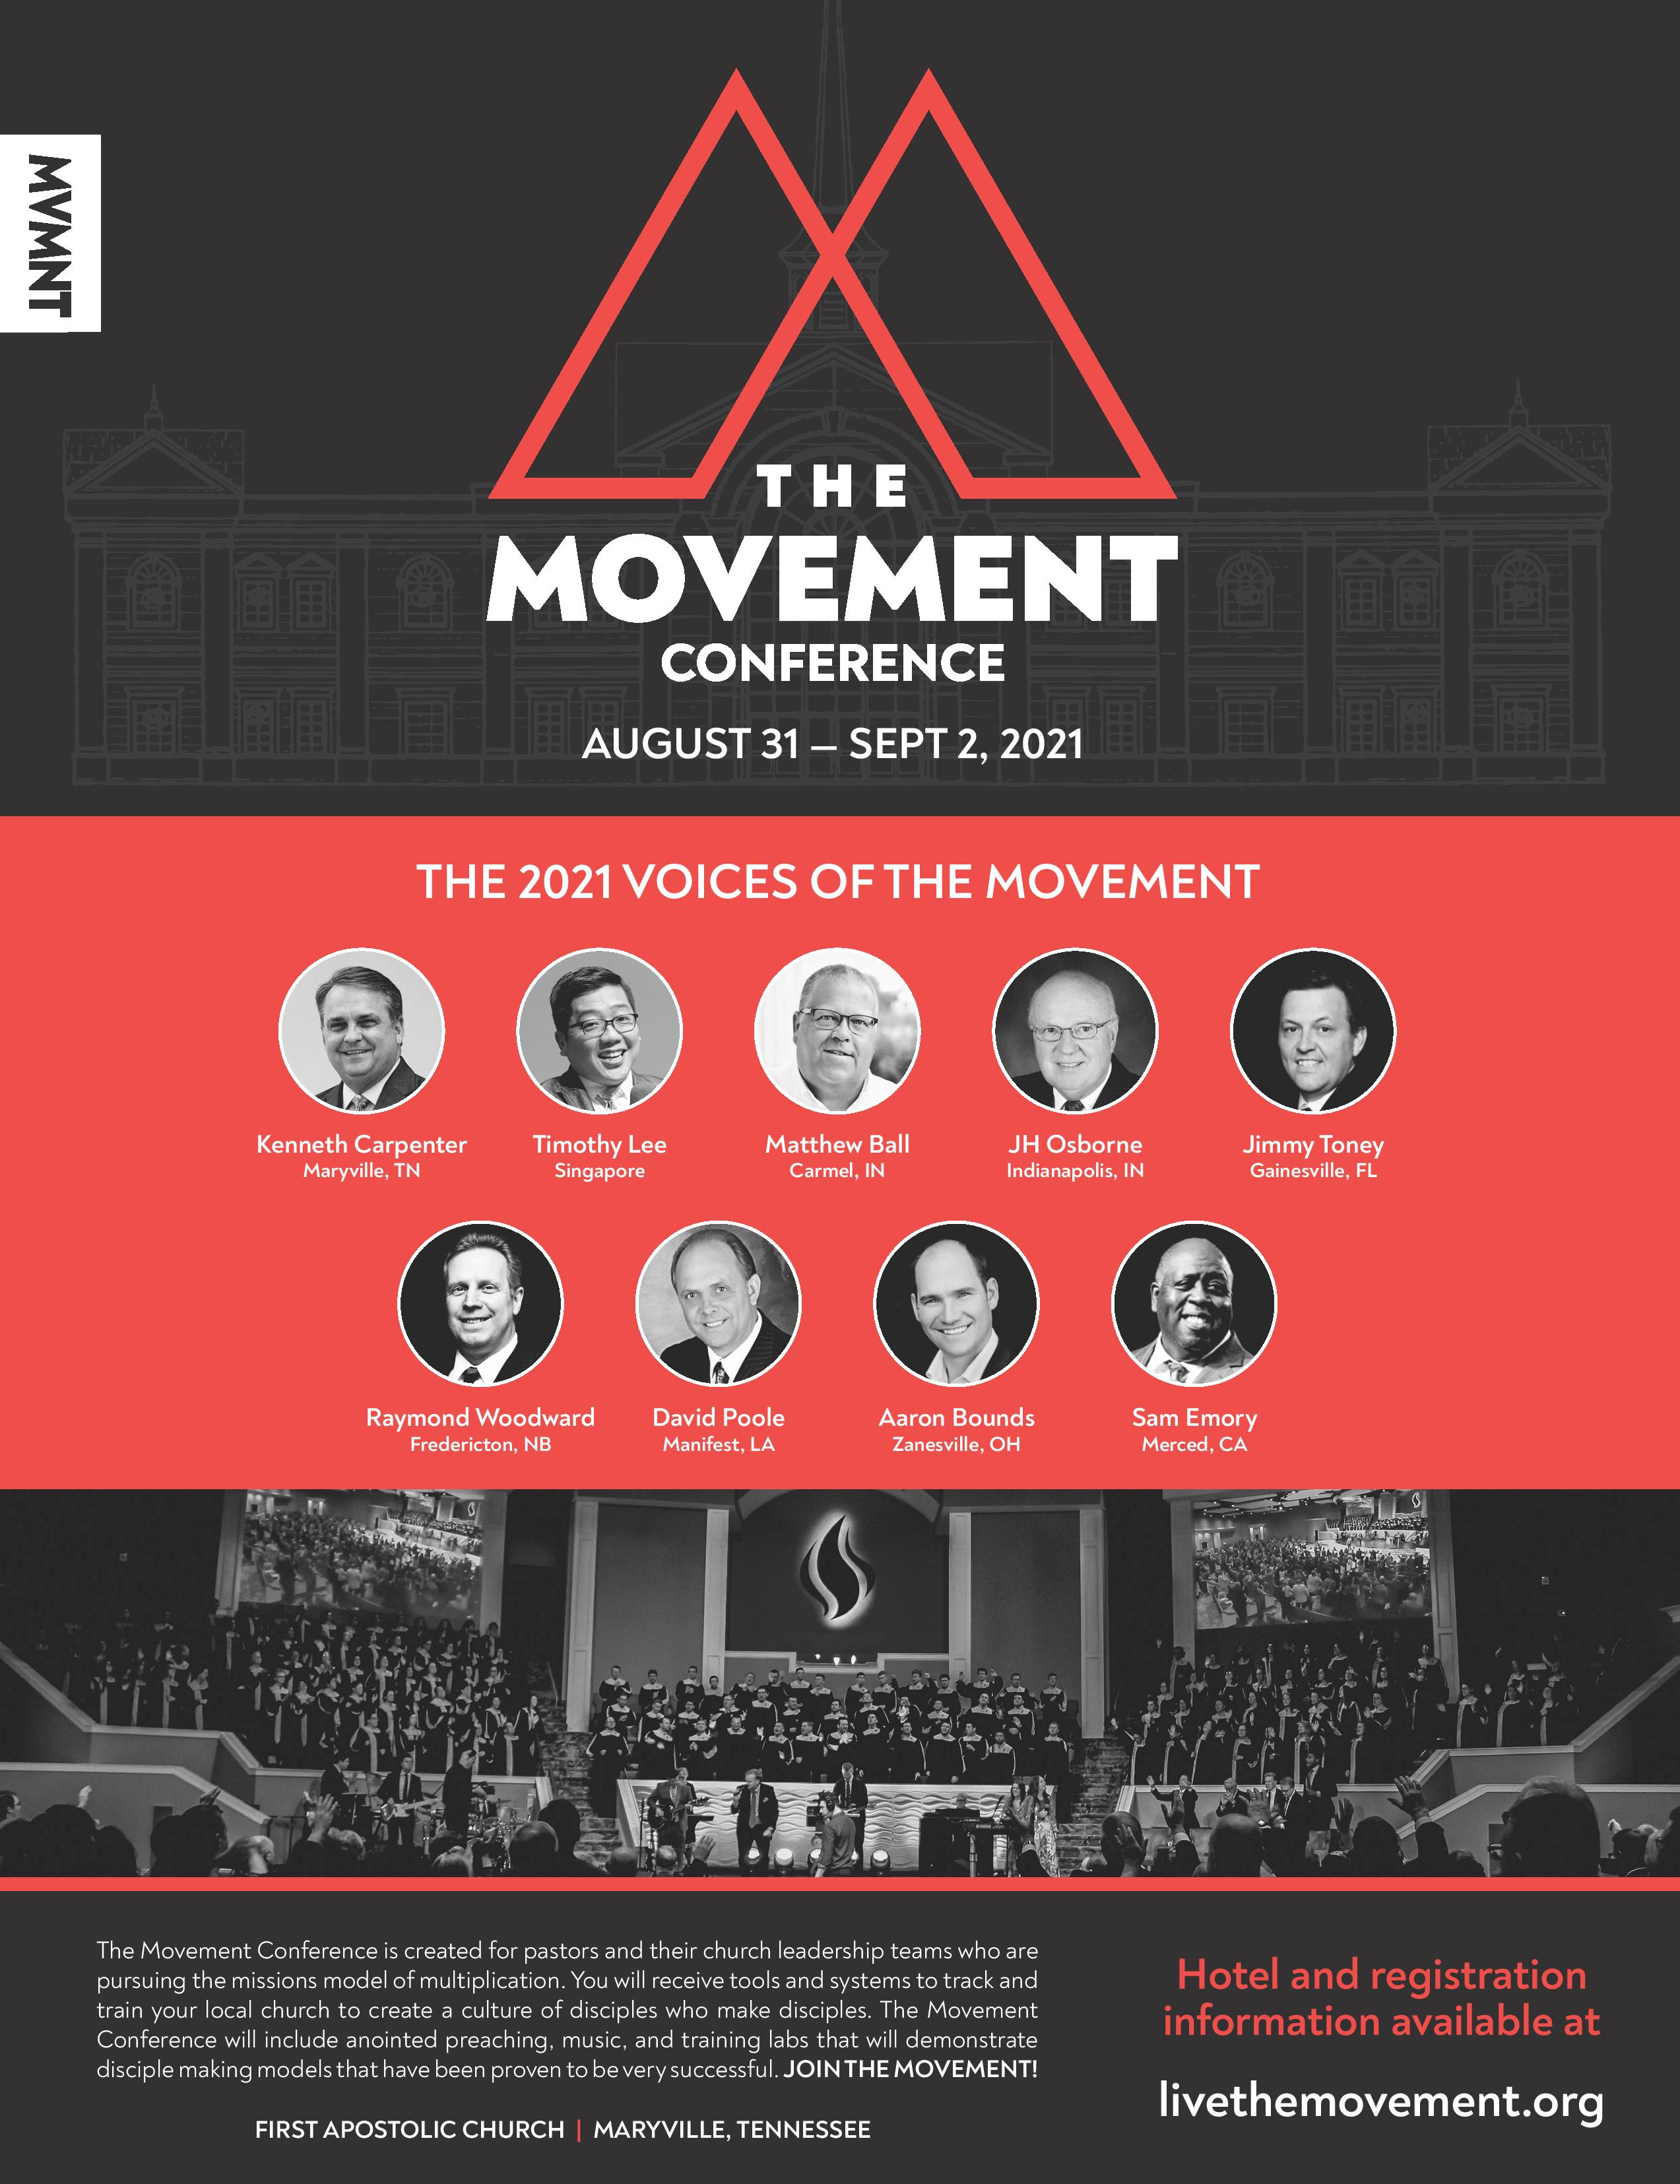 The Movement Conference